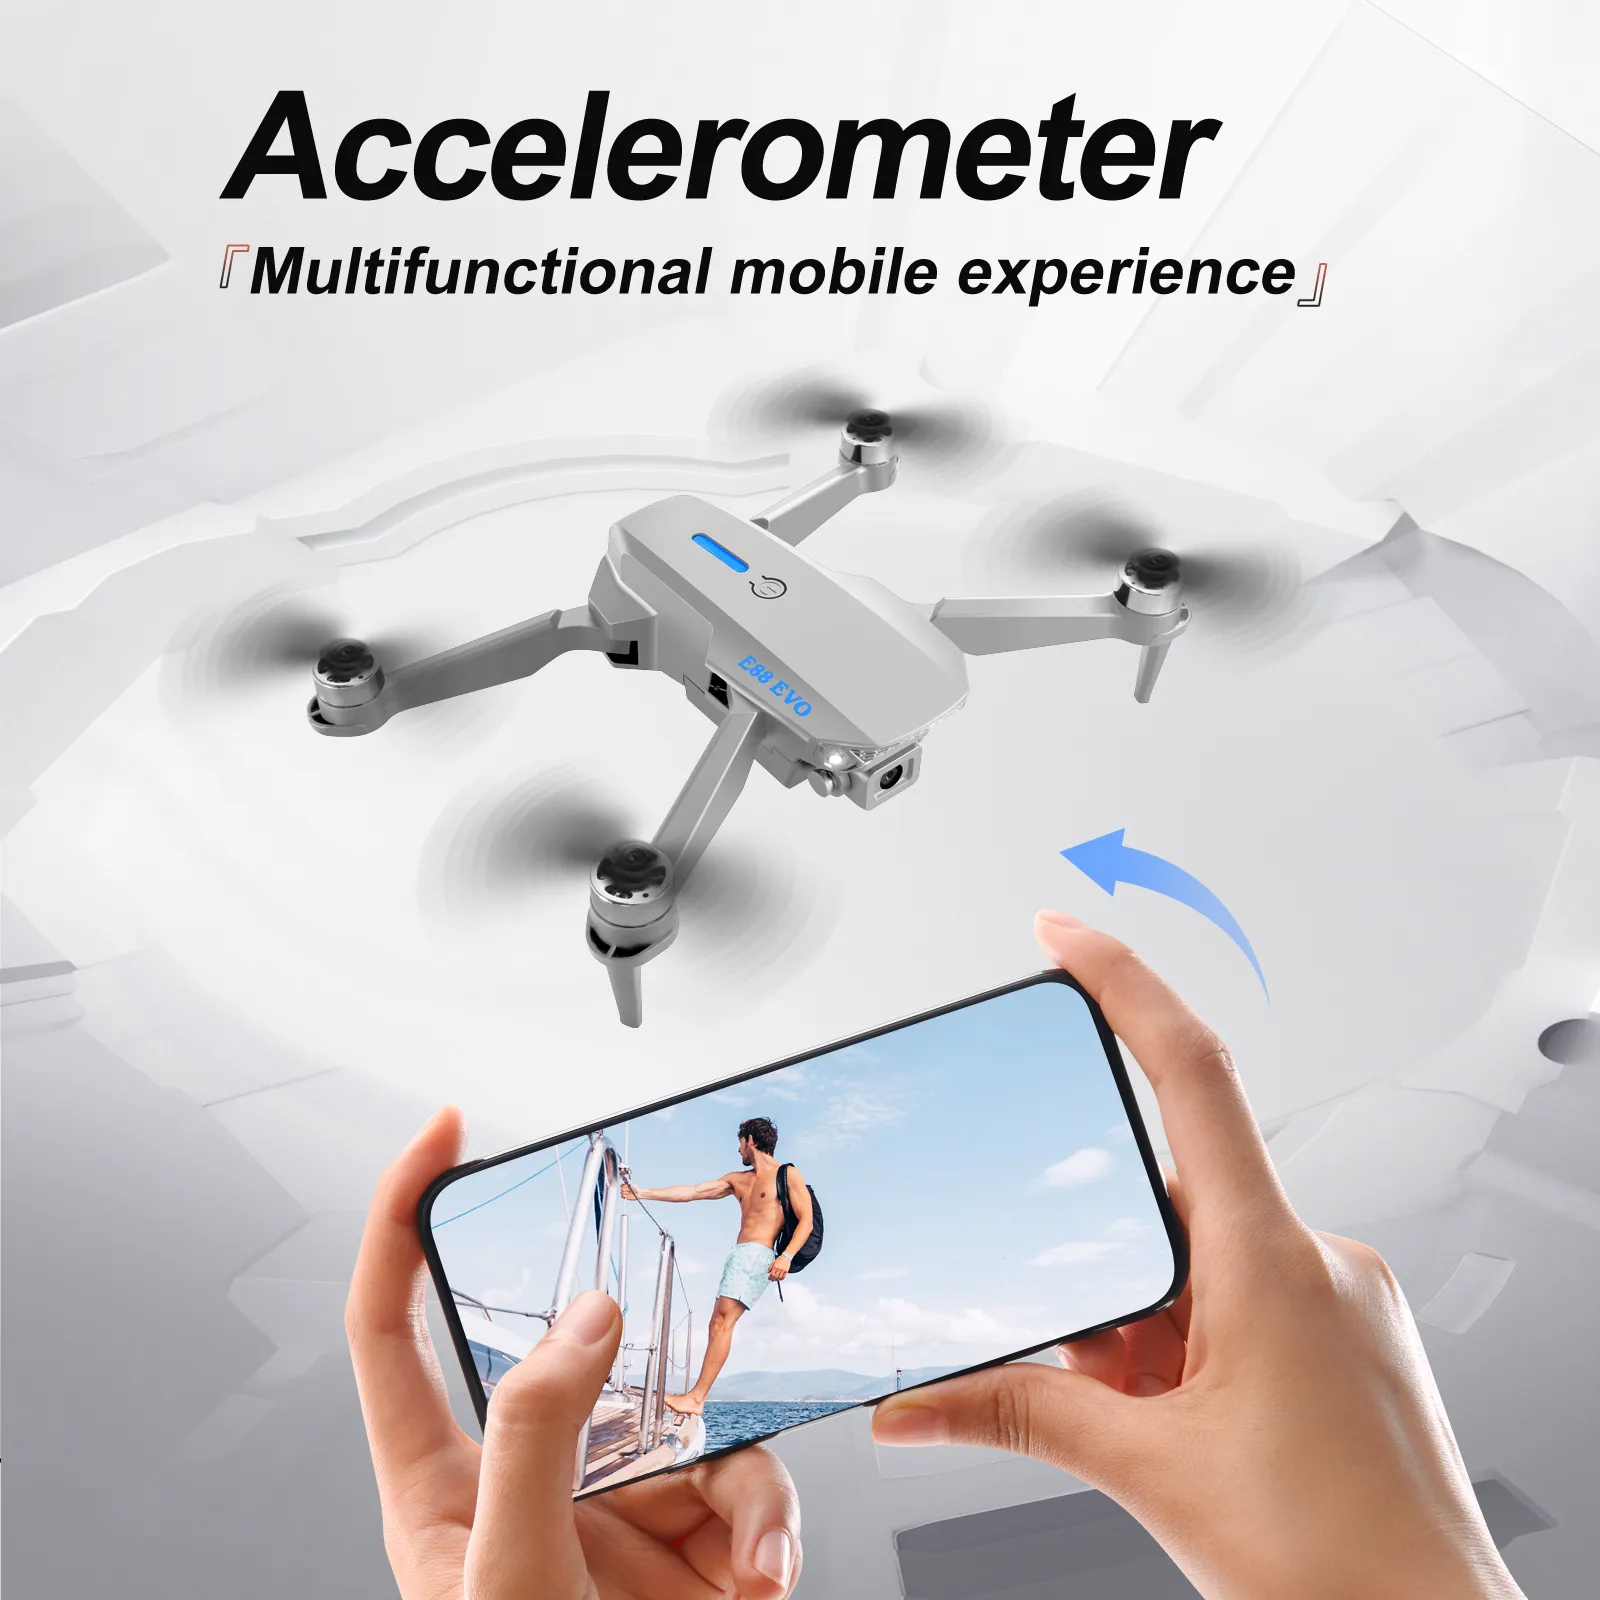 Professional Drone E88 4k wide-angle HD camera WiFi fpv height Hold Foldable RC quadrotor helicopter Camera-free childrens toys